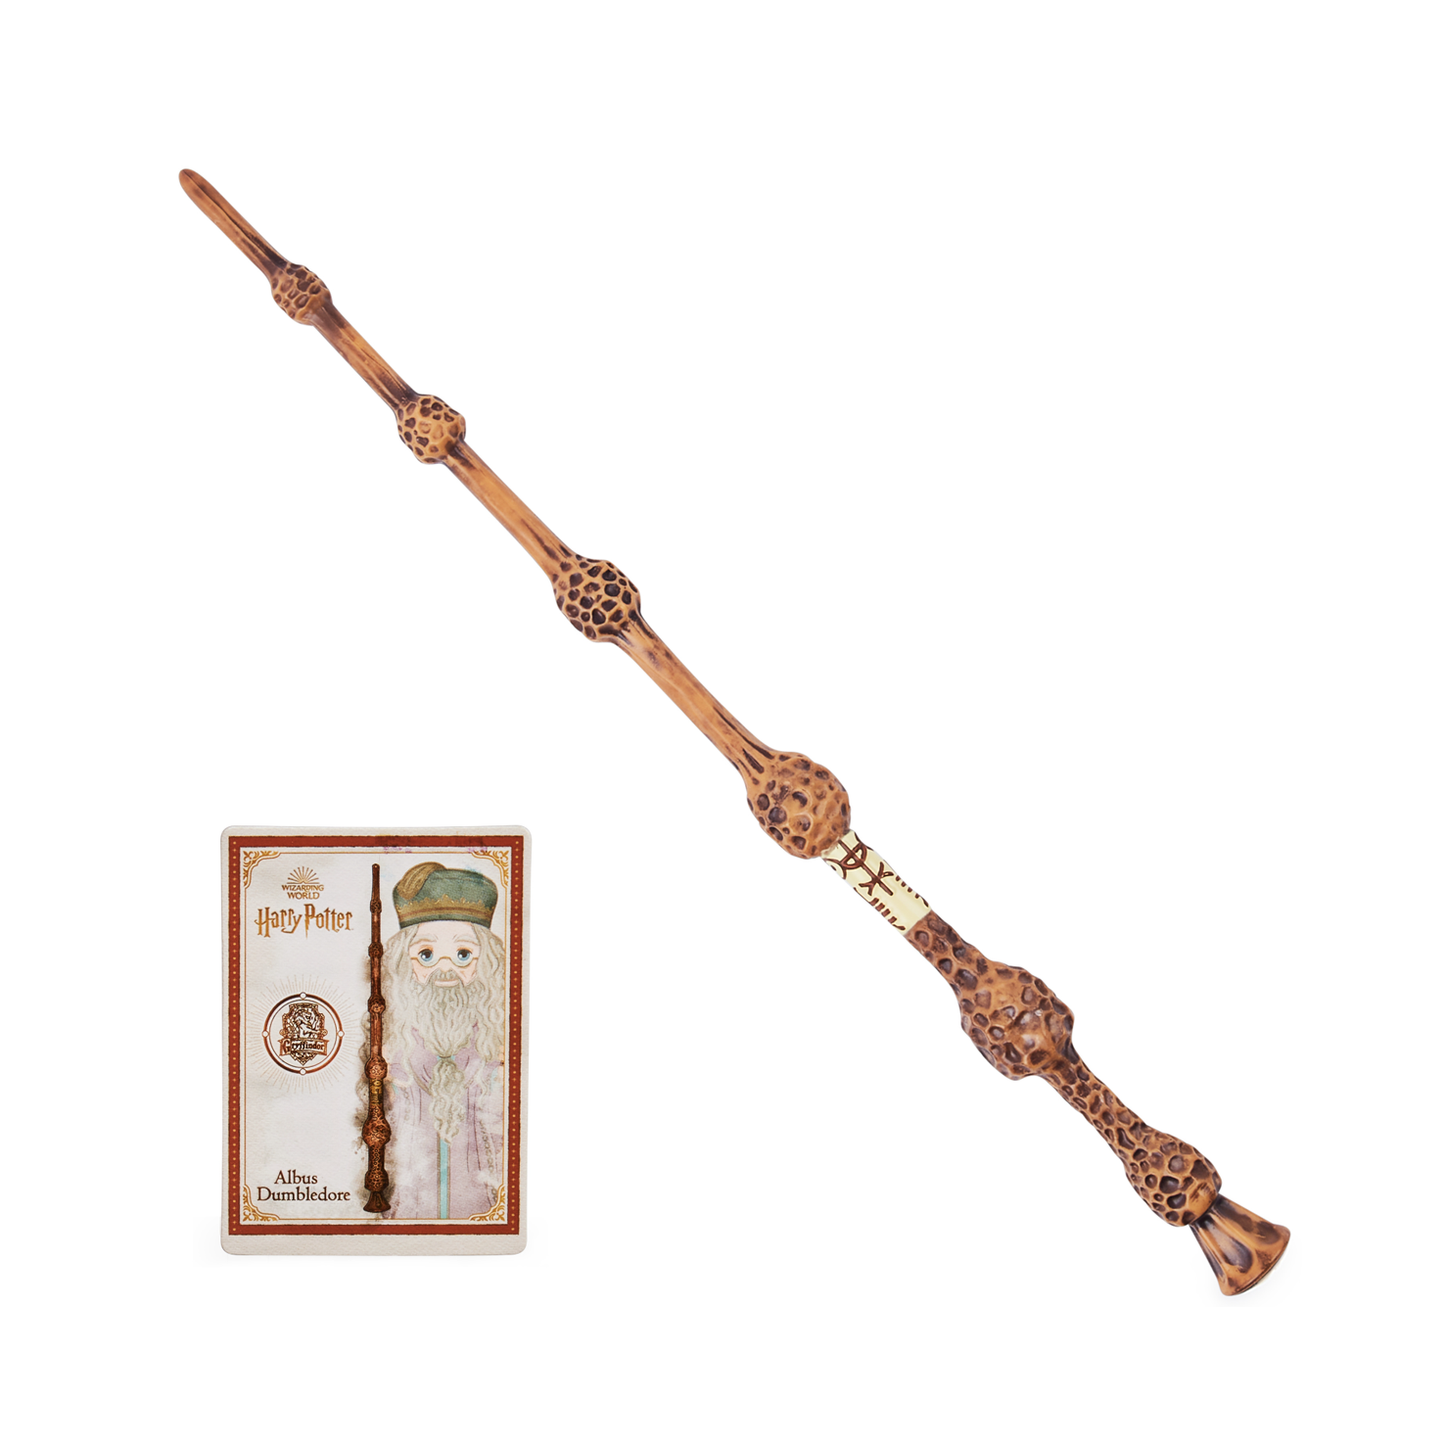 Albus Dumbledore™ Spinmaster Wand